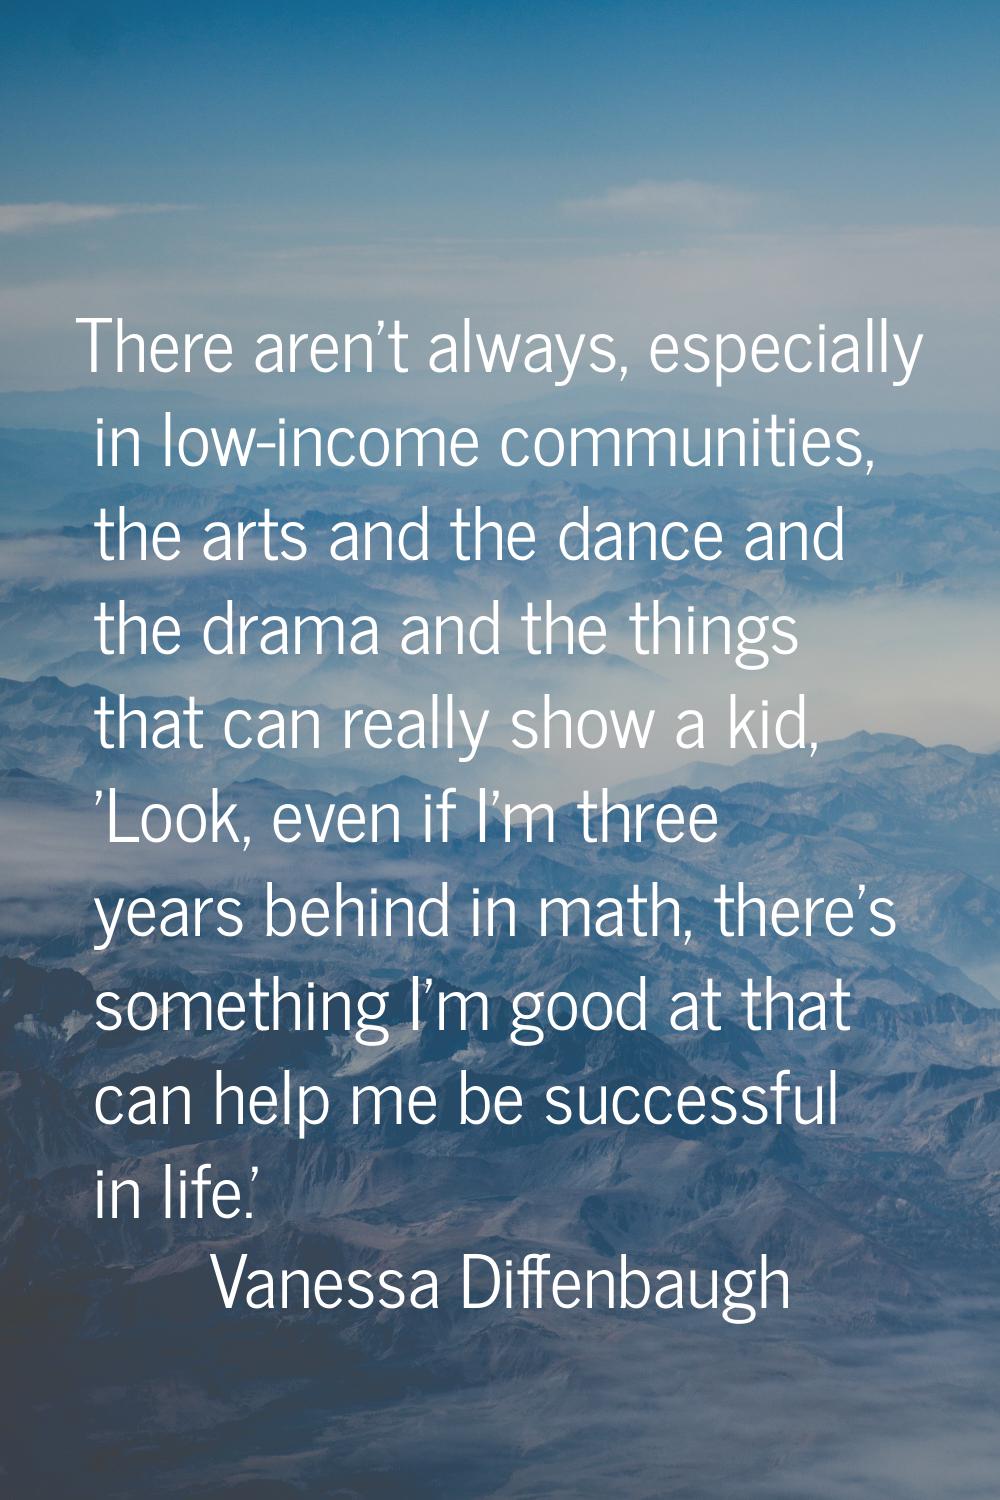 There aren't always, especially in low-income communities, the arts and the dance and the drama and